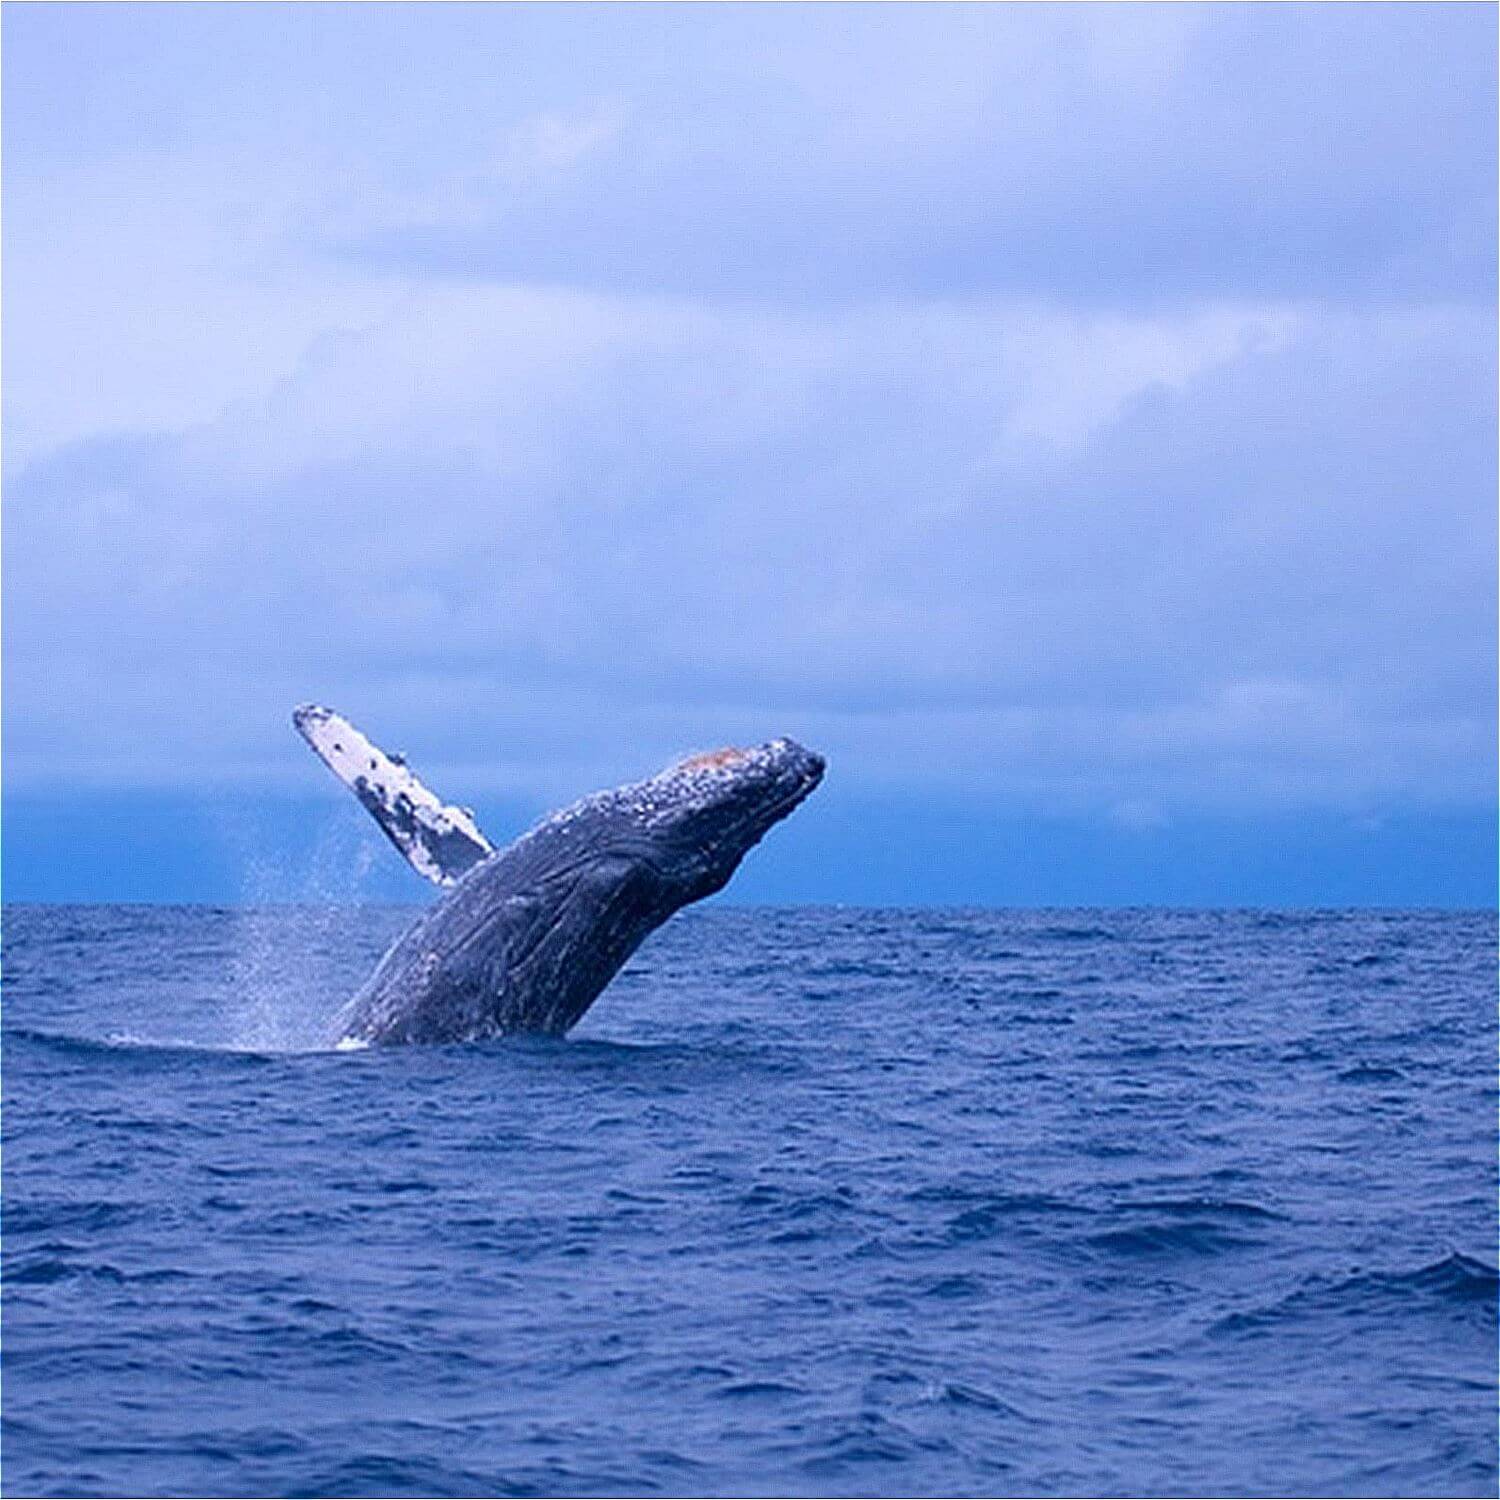 If you're lucky, you might even get to see a whale at sea = Pixta